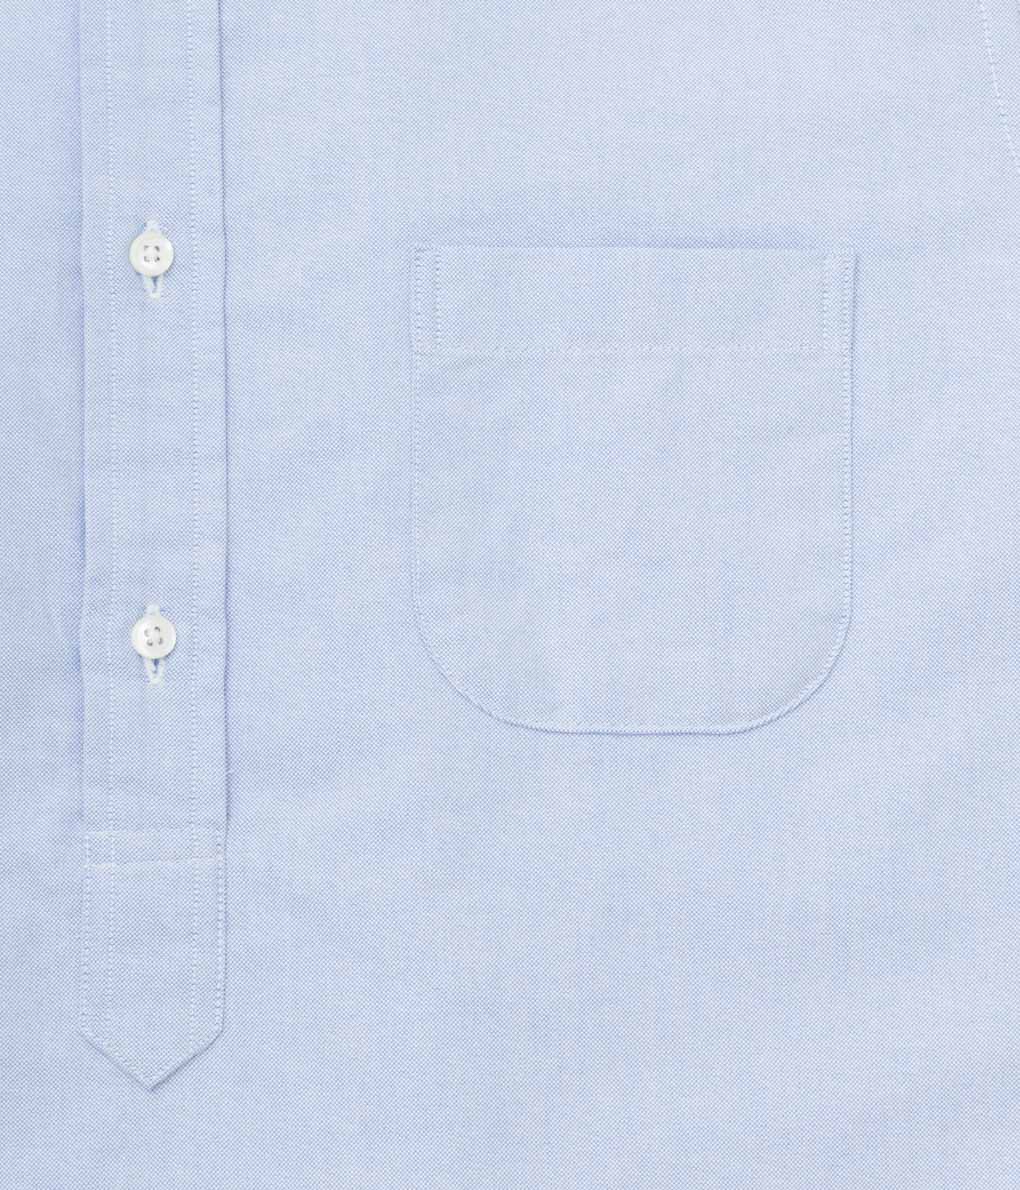 INDIVIDUALIZED SHIRTS "CAMBRIDGE OXFORD (NEW STANDARD FIT POP OVER SHORT SLEEVE SHIRT)" (LIGHT BLUE)